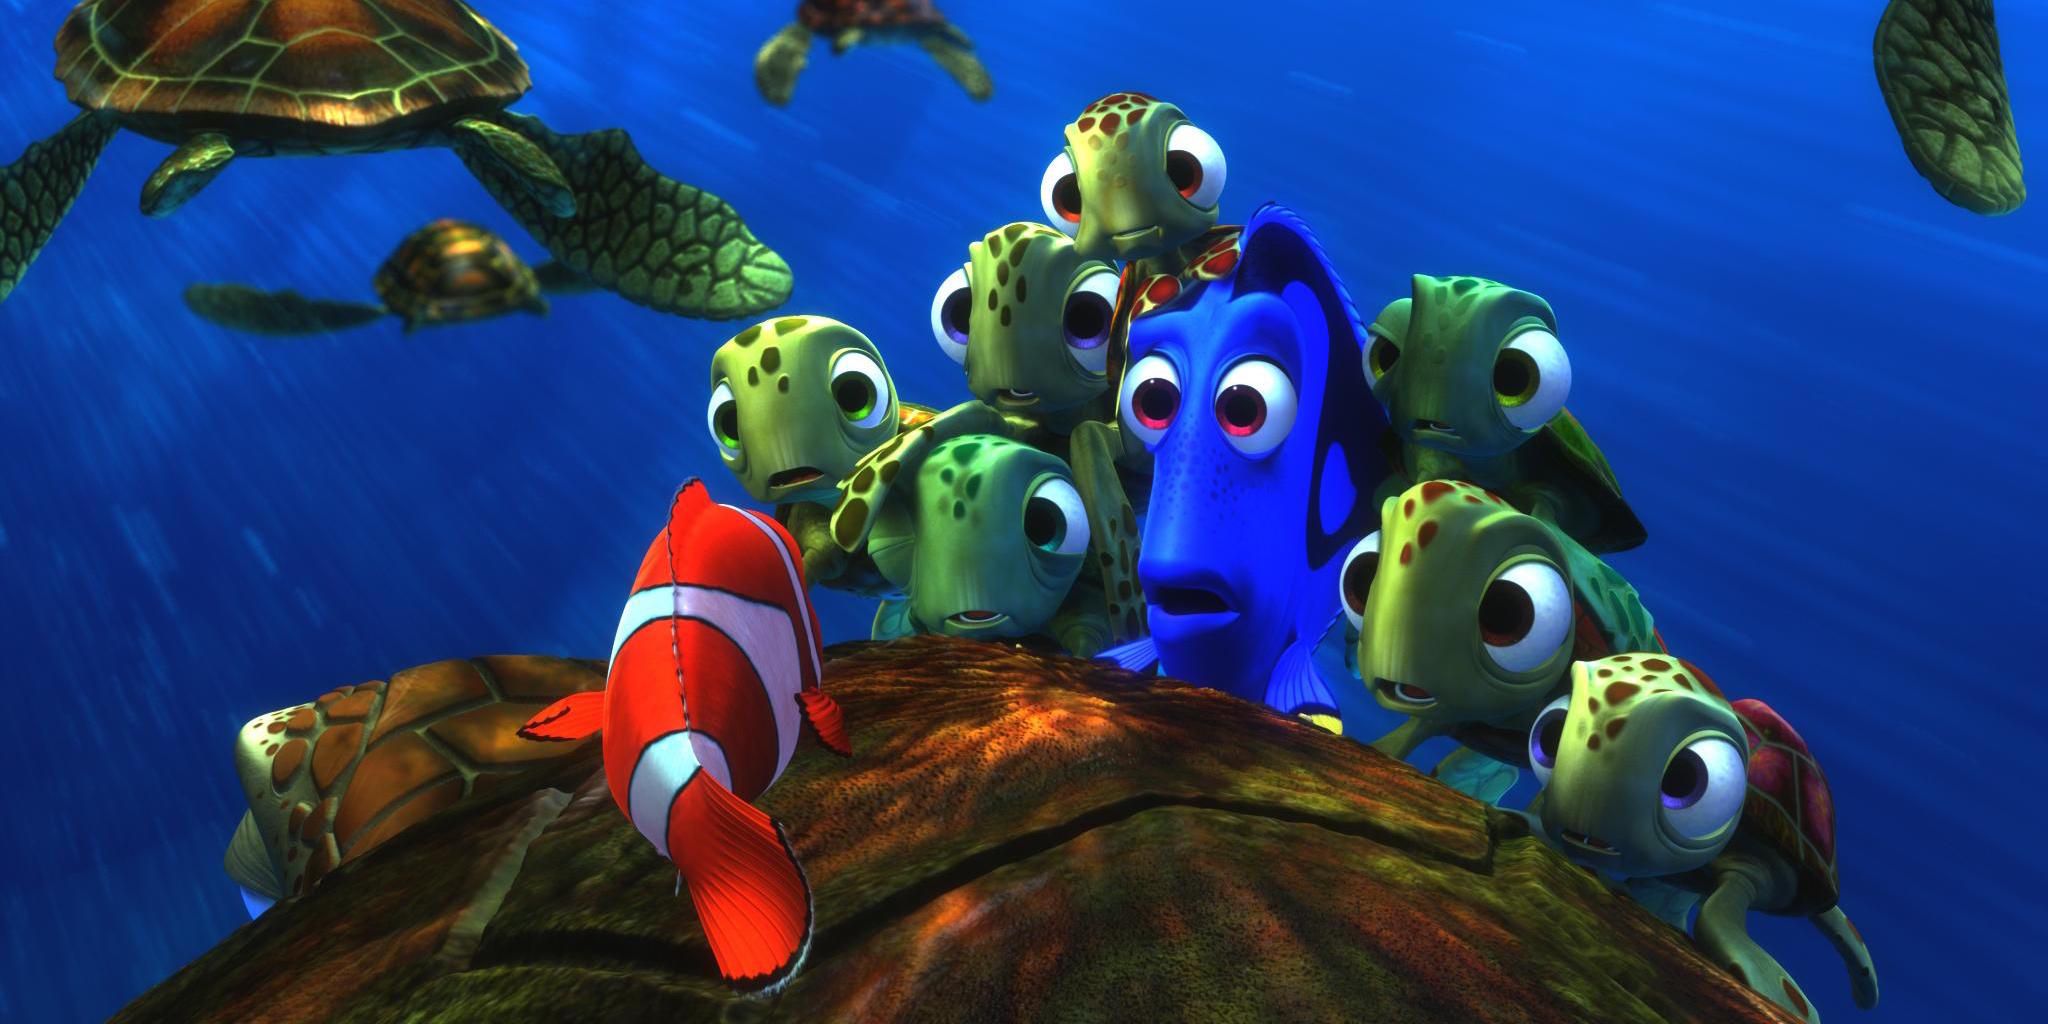 Marlin talks to Dory and others in Finding Nemo